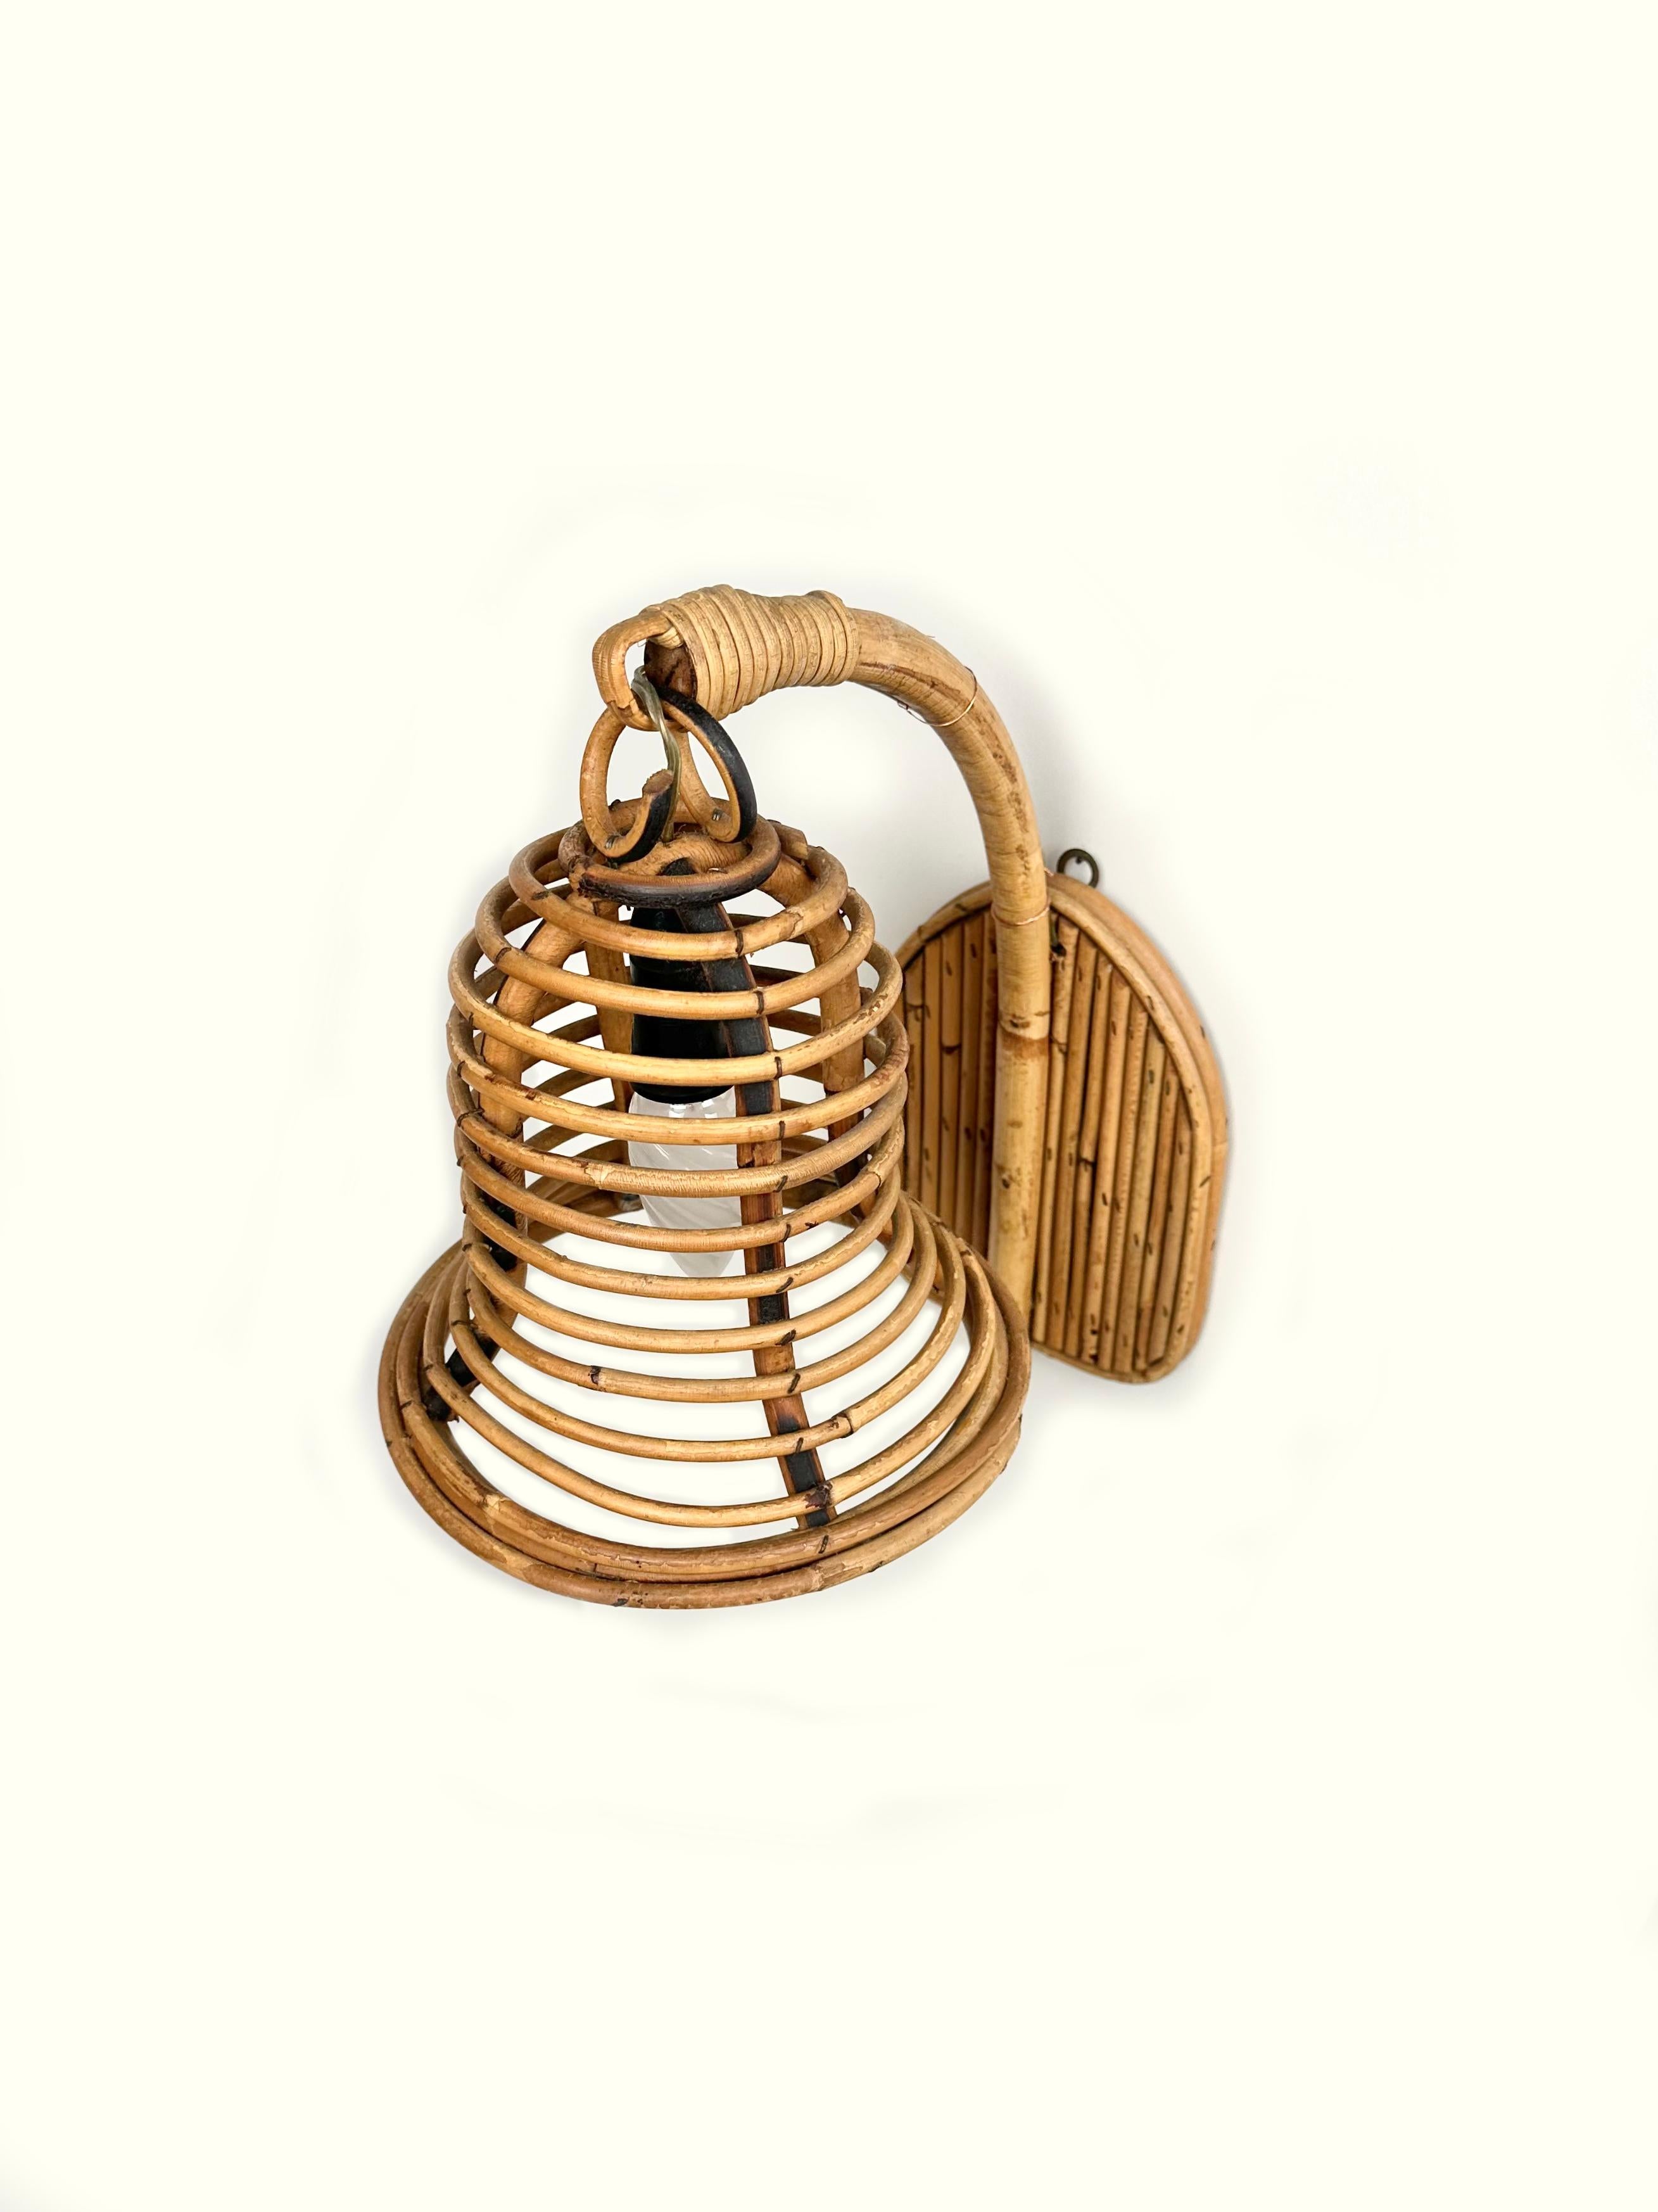 Rattan & Bamboo Sconce Wall Lamp Lantern Louis Sognot Style, Italy, 1960s For Sale 3